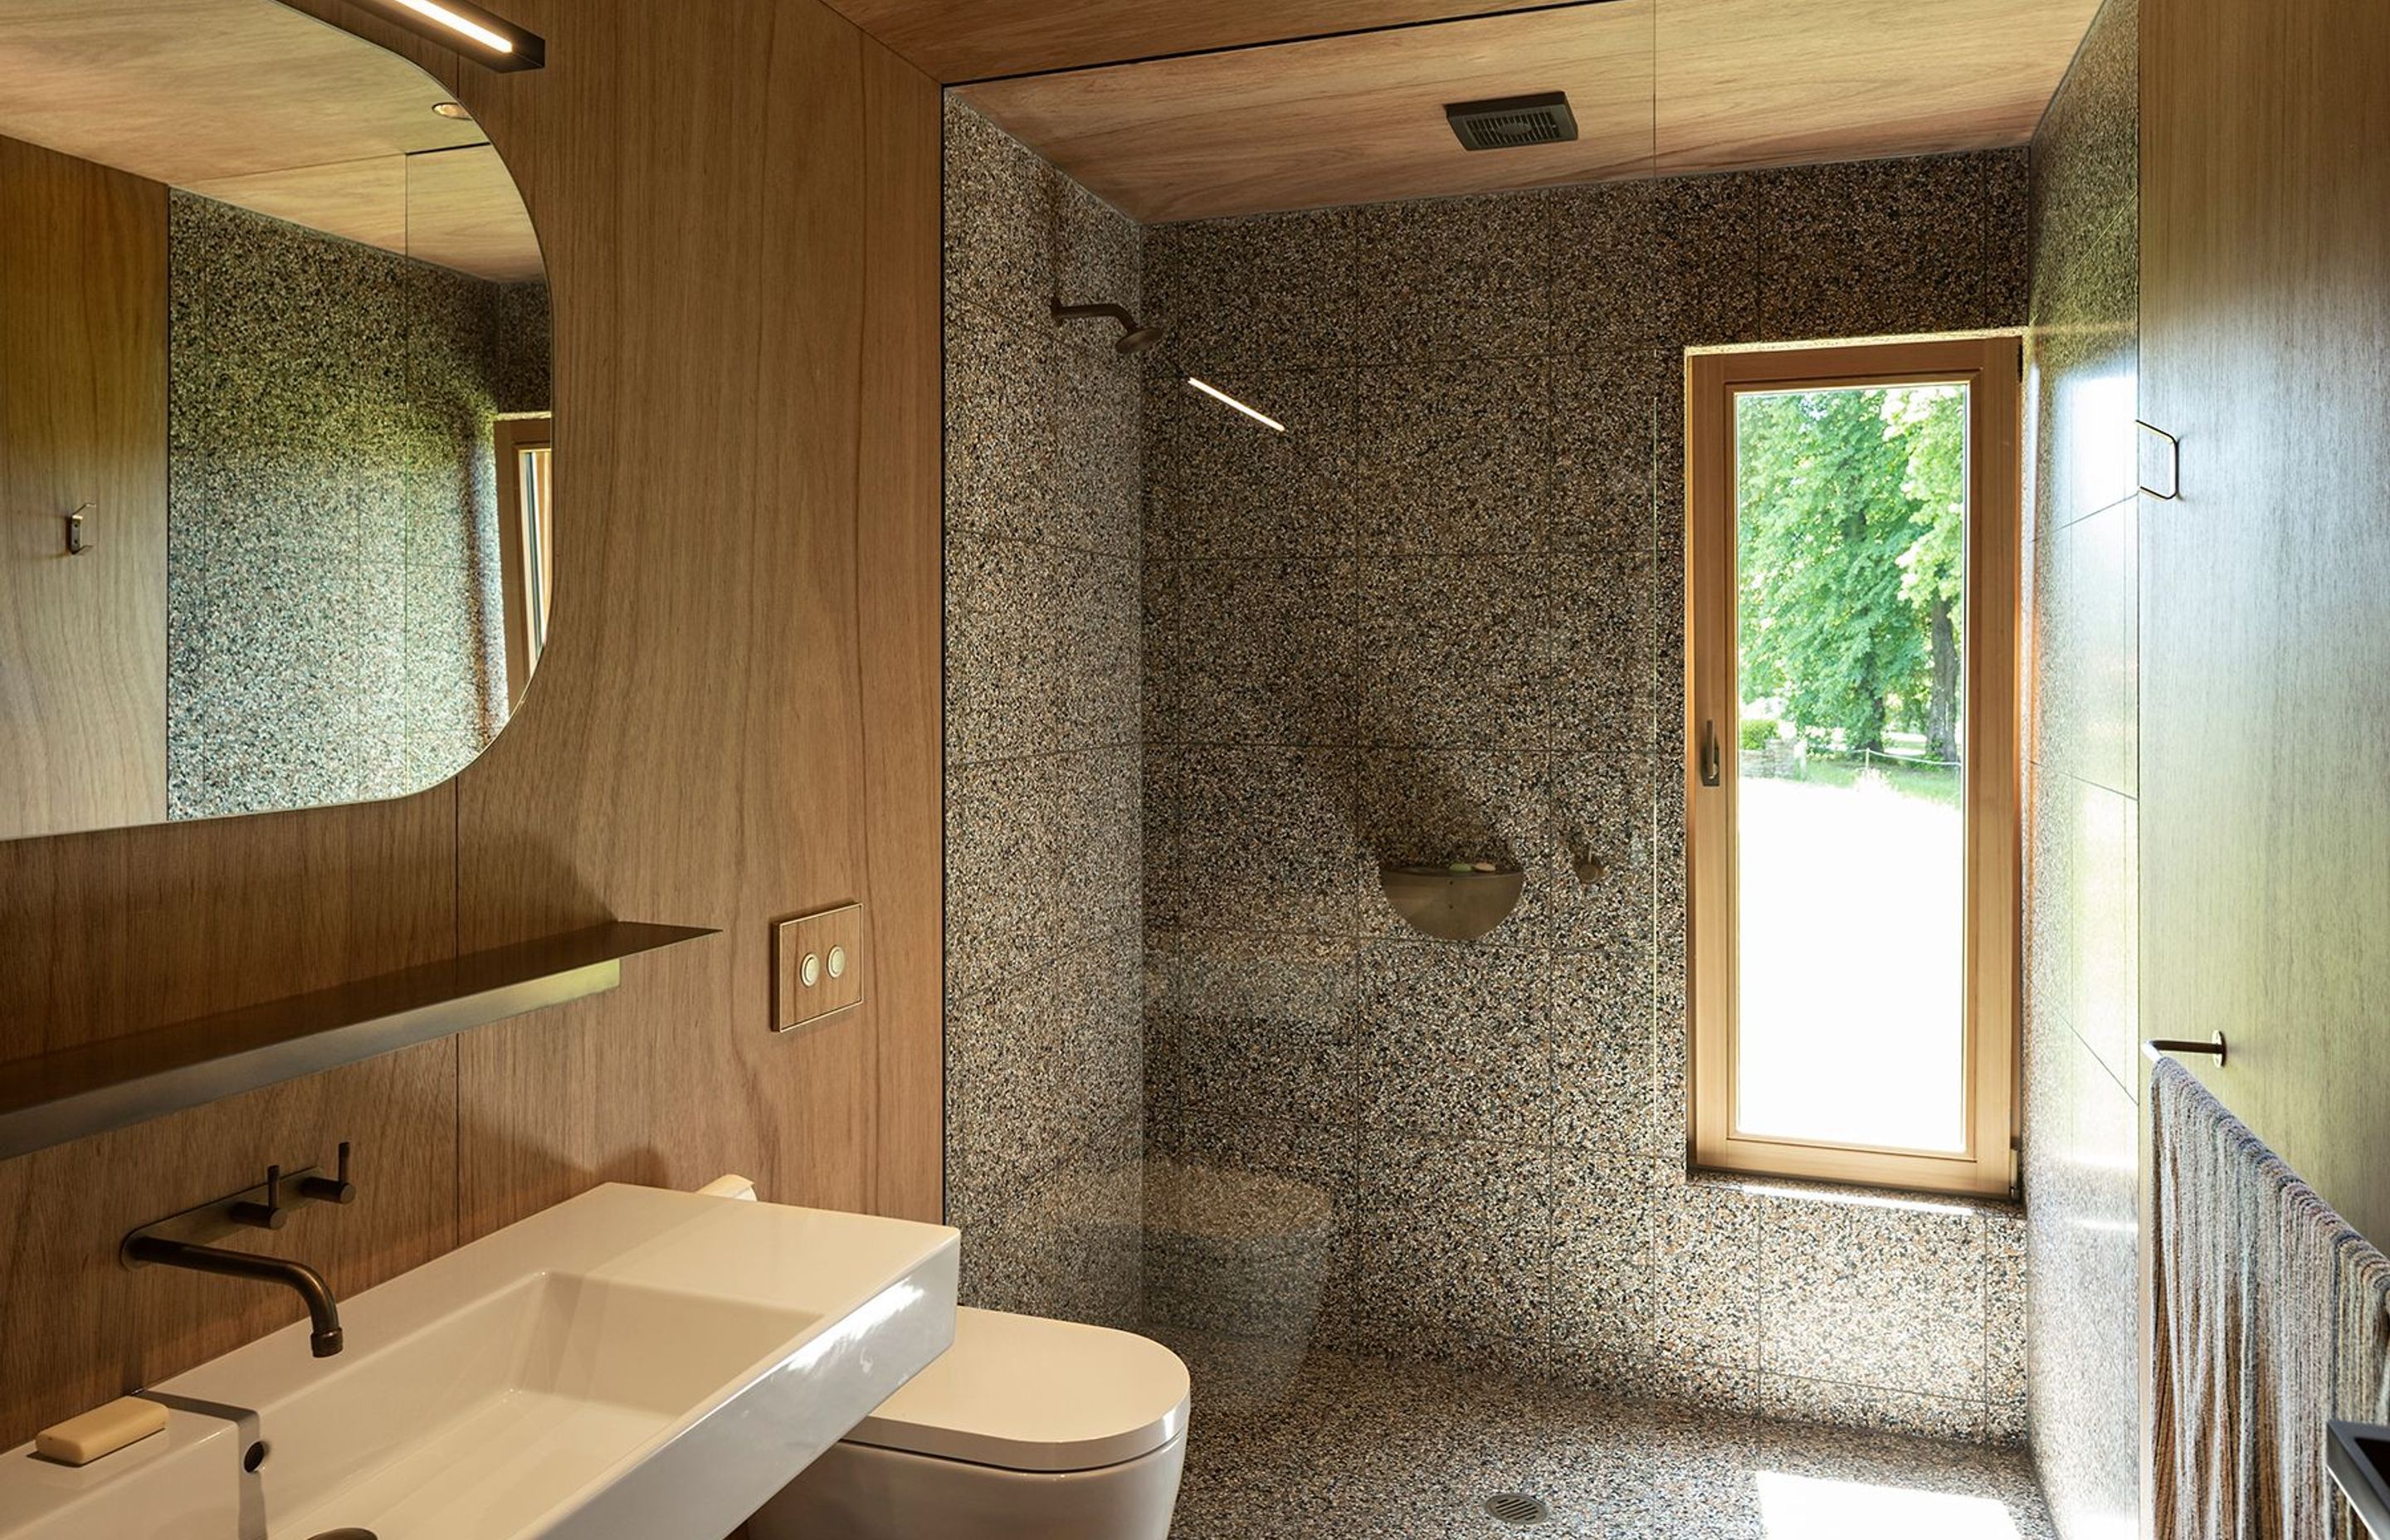 Timber cabinetry continues into the bathroom space with its distinctive speckled tiling and bronze tapware.